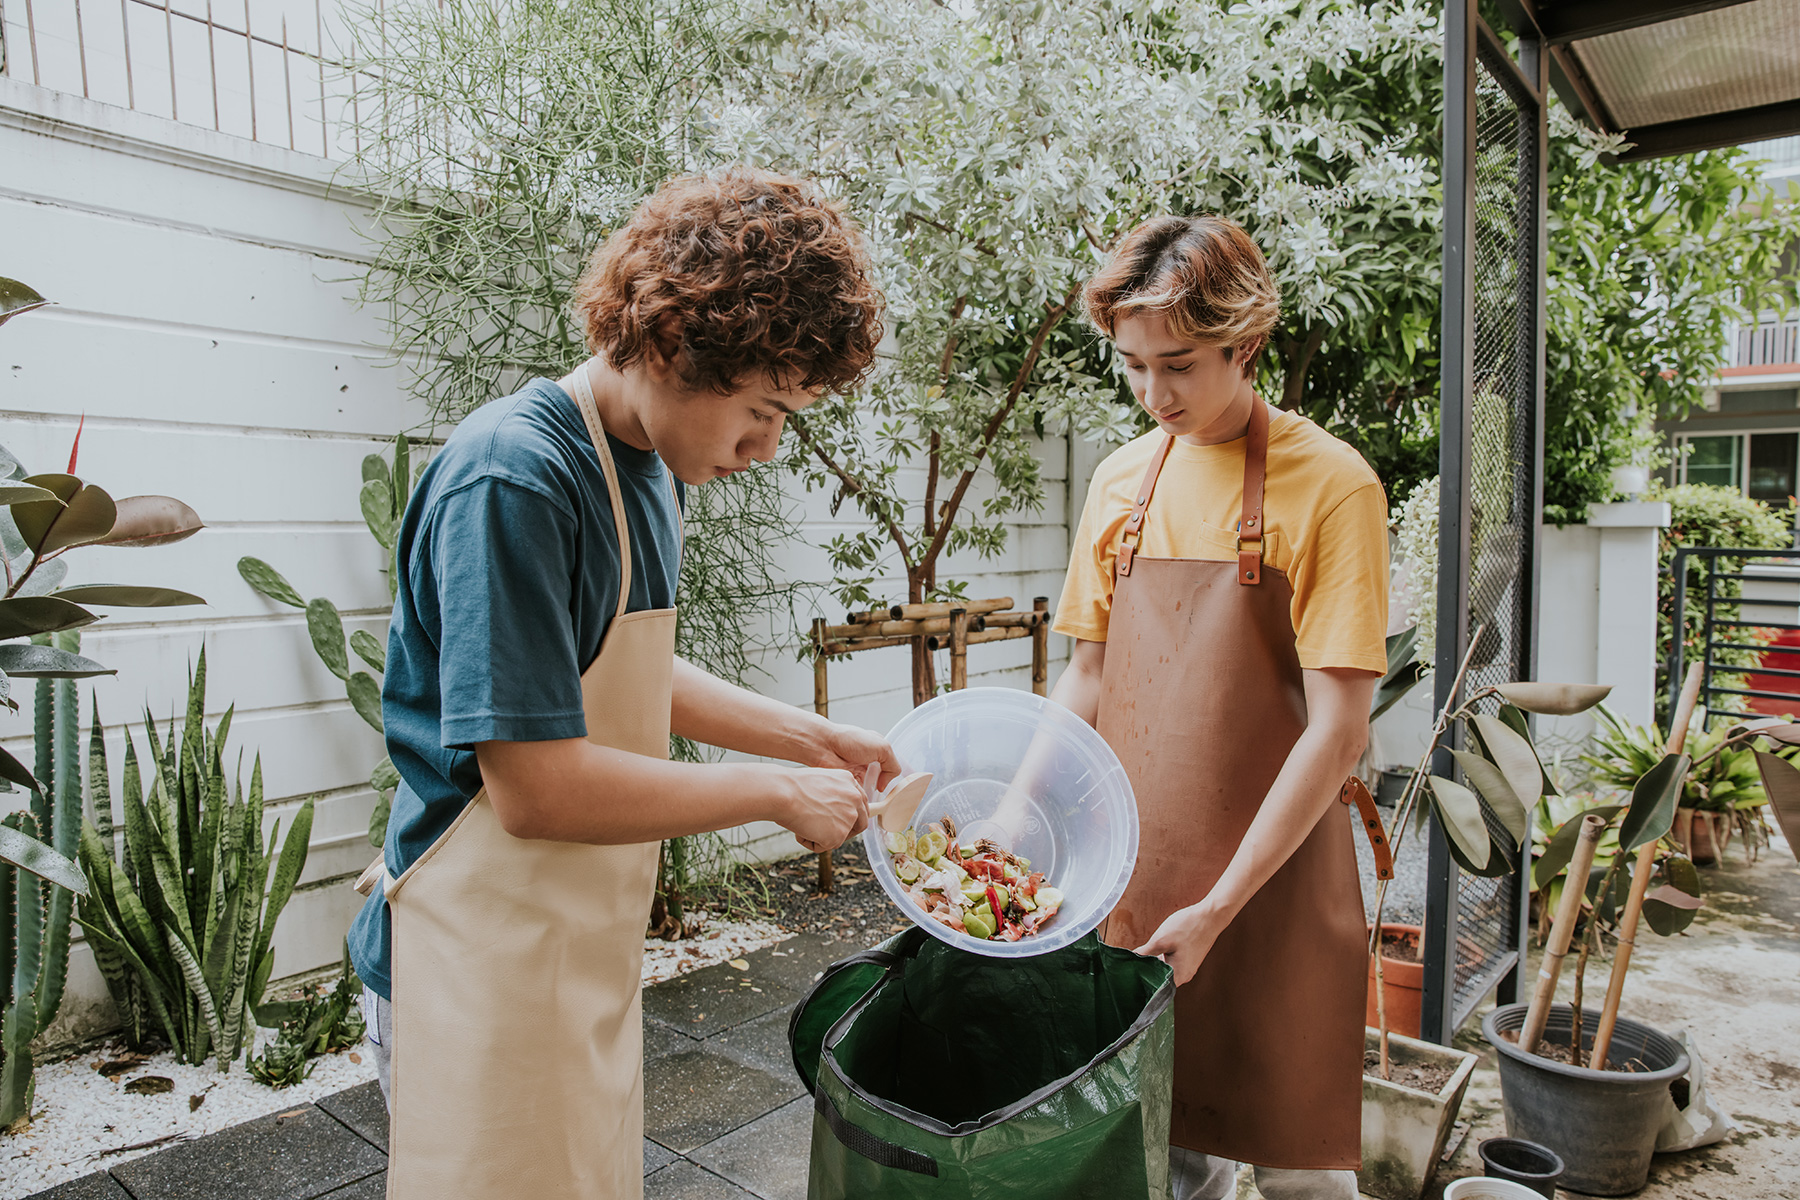 Two people composting food waste in their garden together